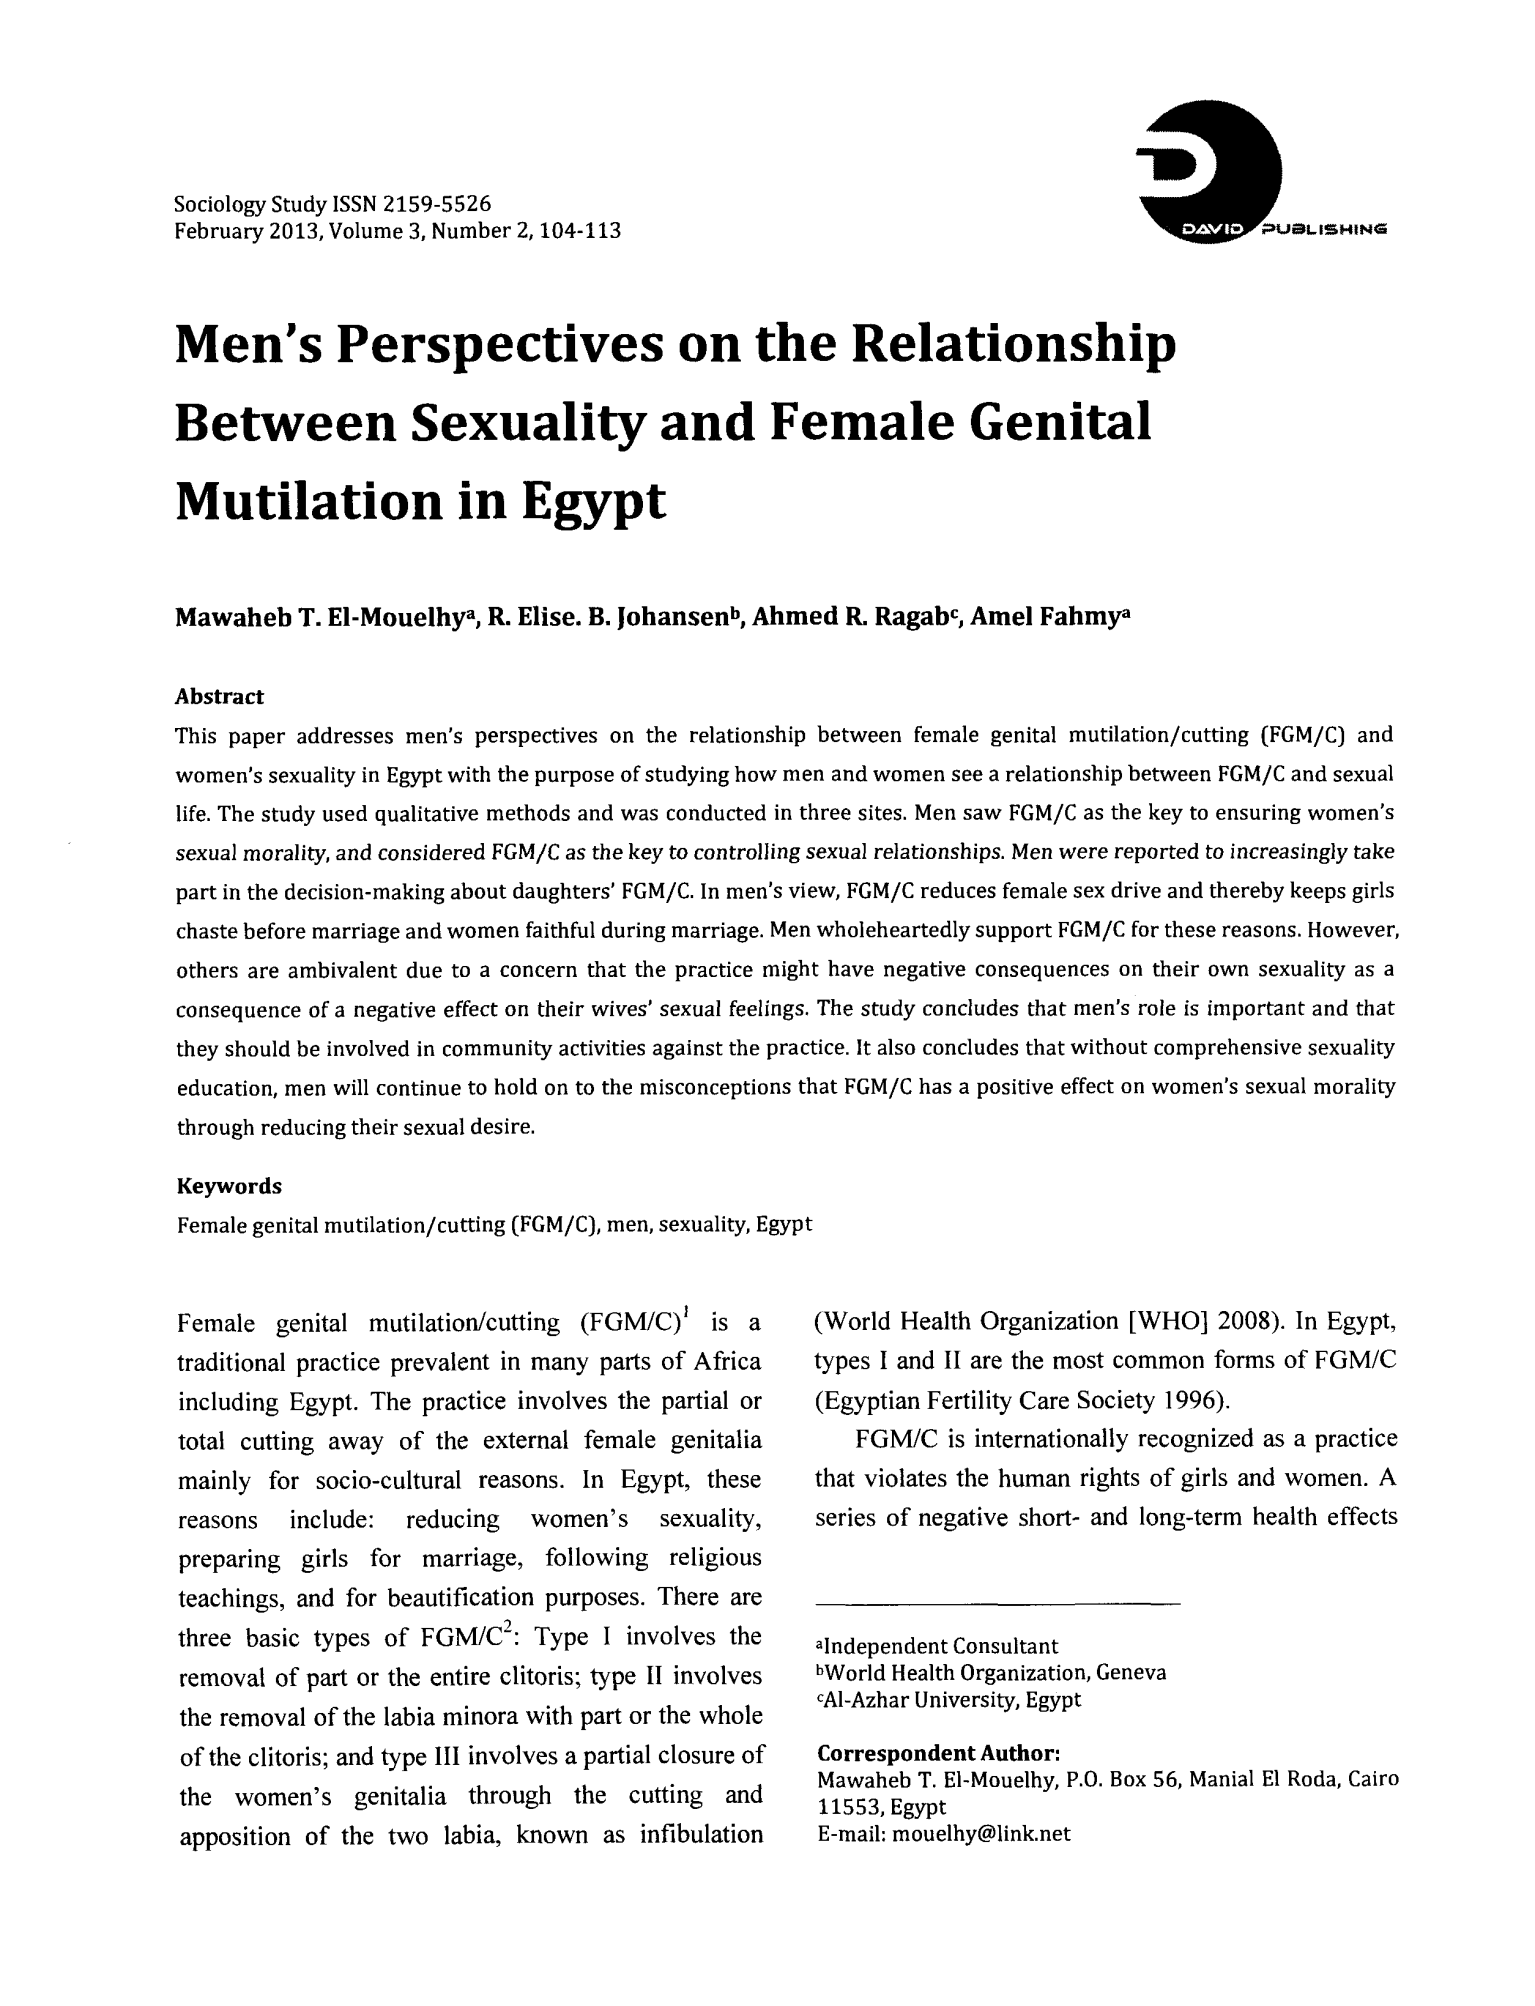 Men's Perspectives on the Relationship Between Sexuality and Female Genital Mutilation in Egypt